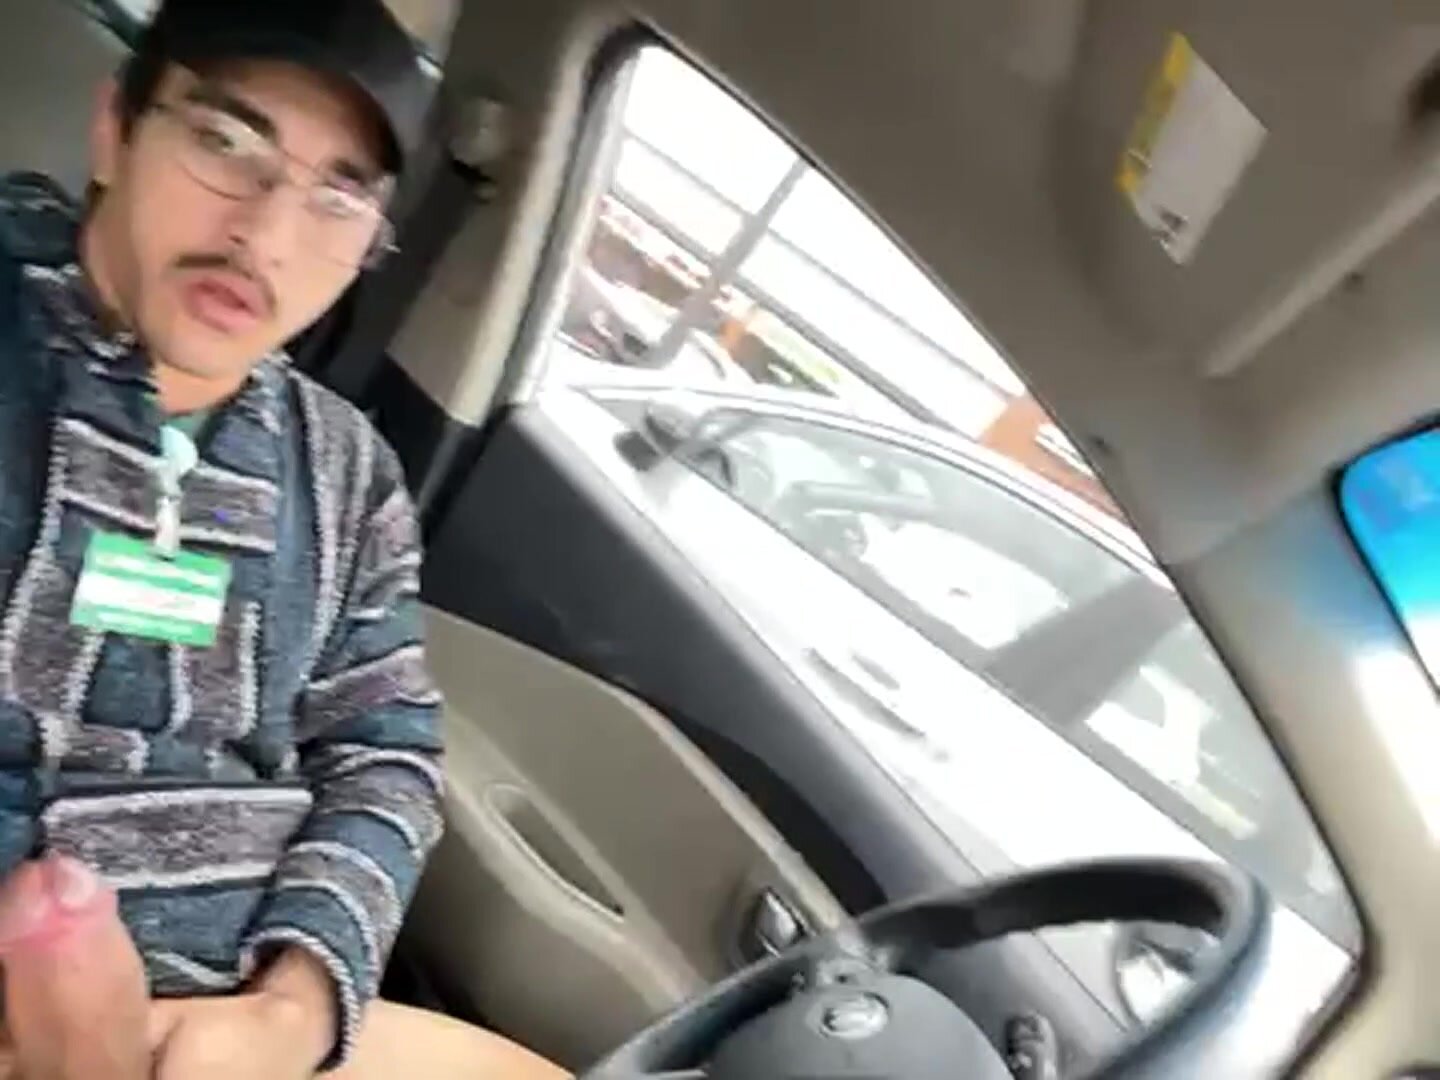 jerking off in his car in a parking lot